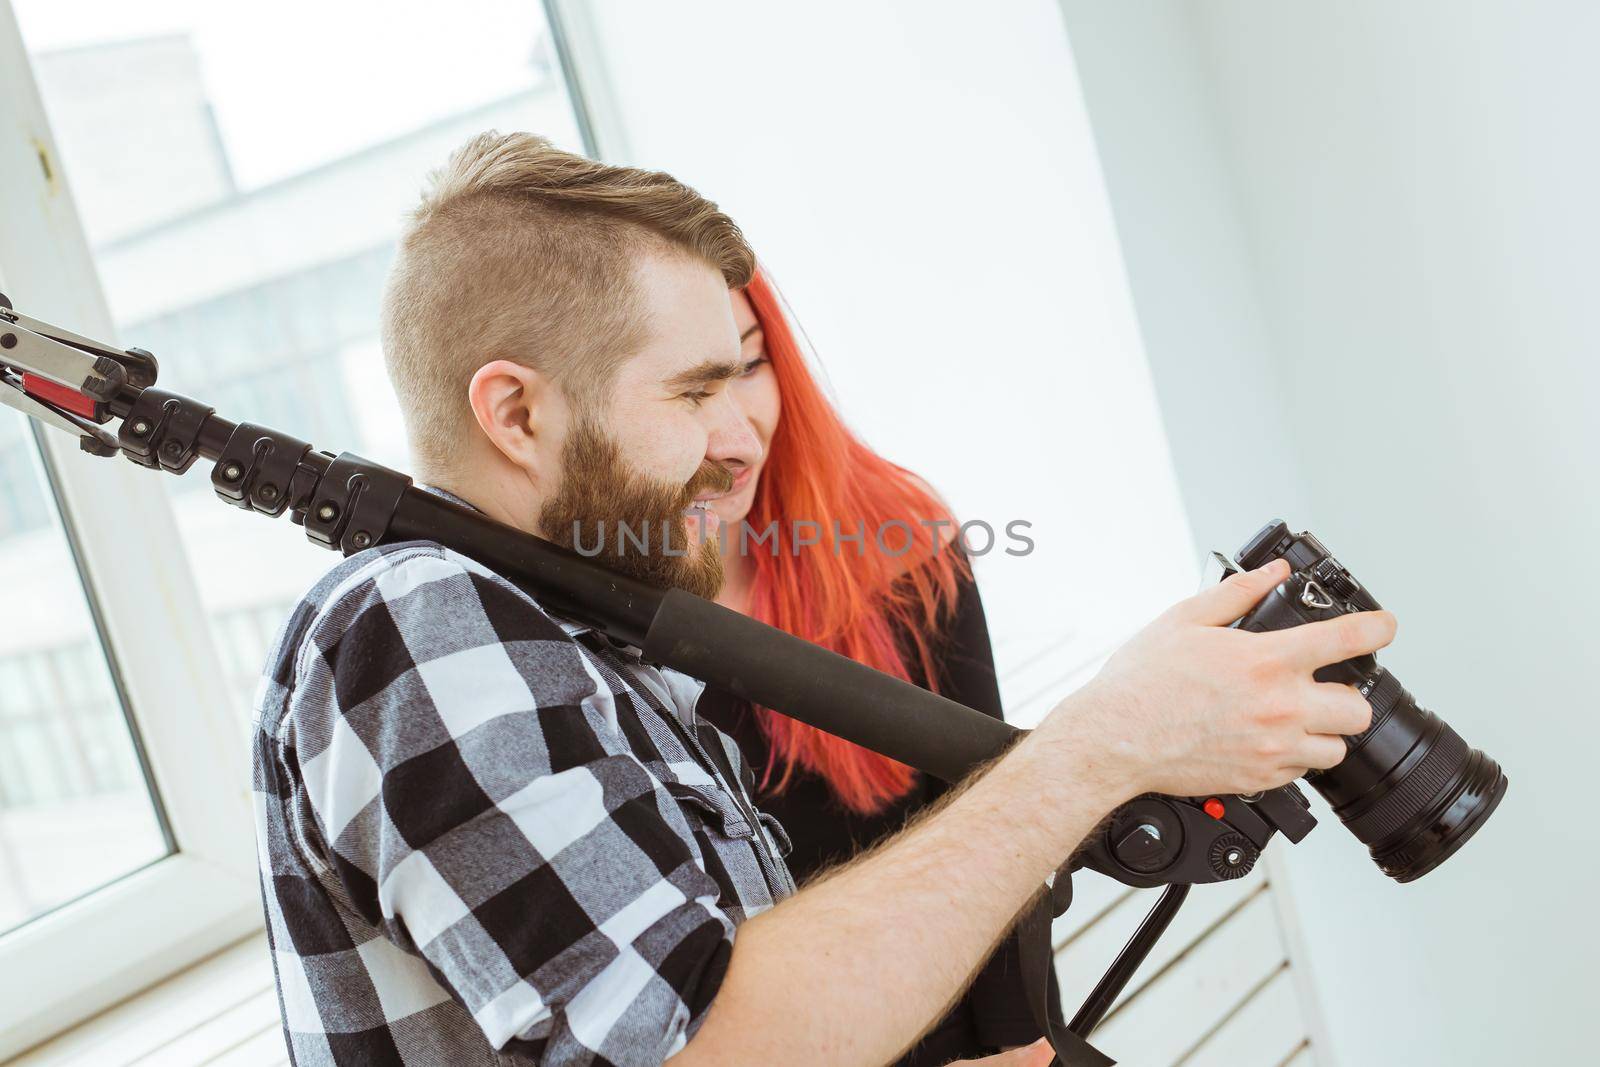 Video production, shooting advertising and content for social networks - Operator working with a camera on his shoulder and shows the girl footage. by Satura86